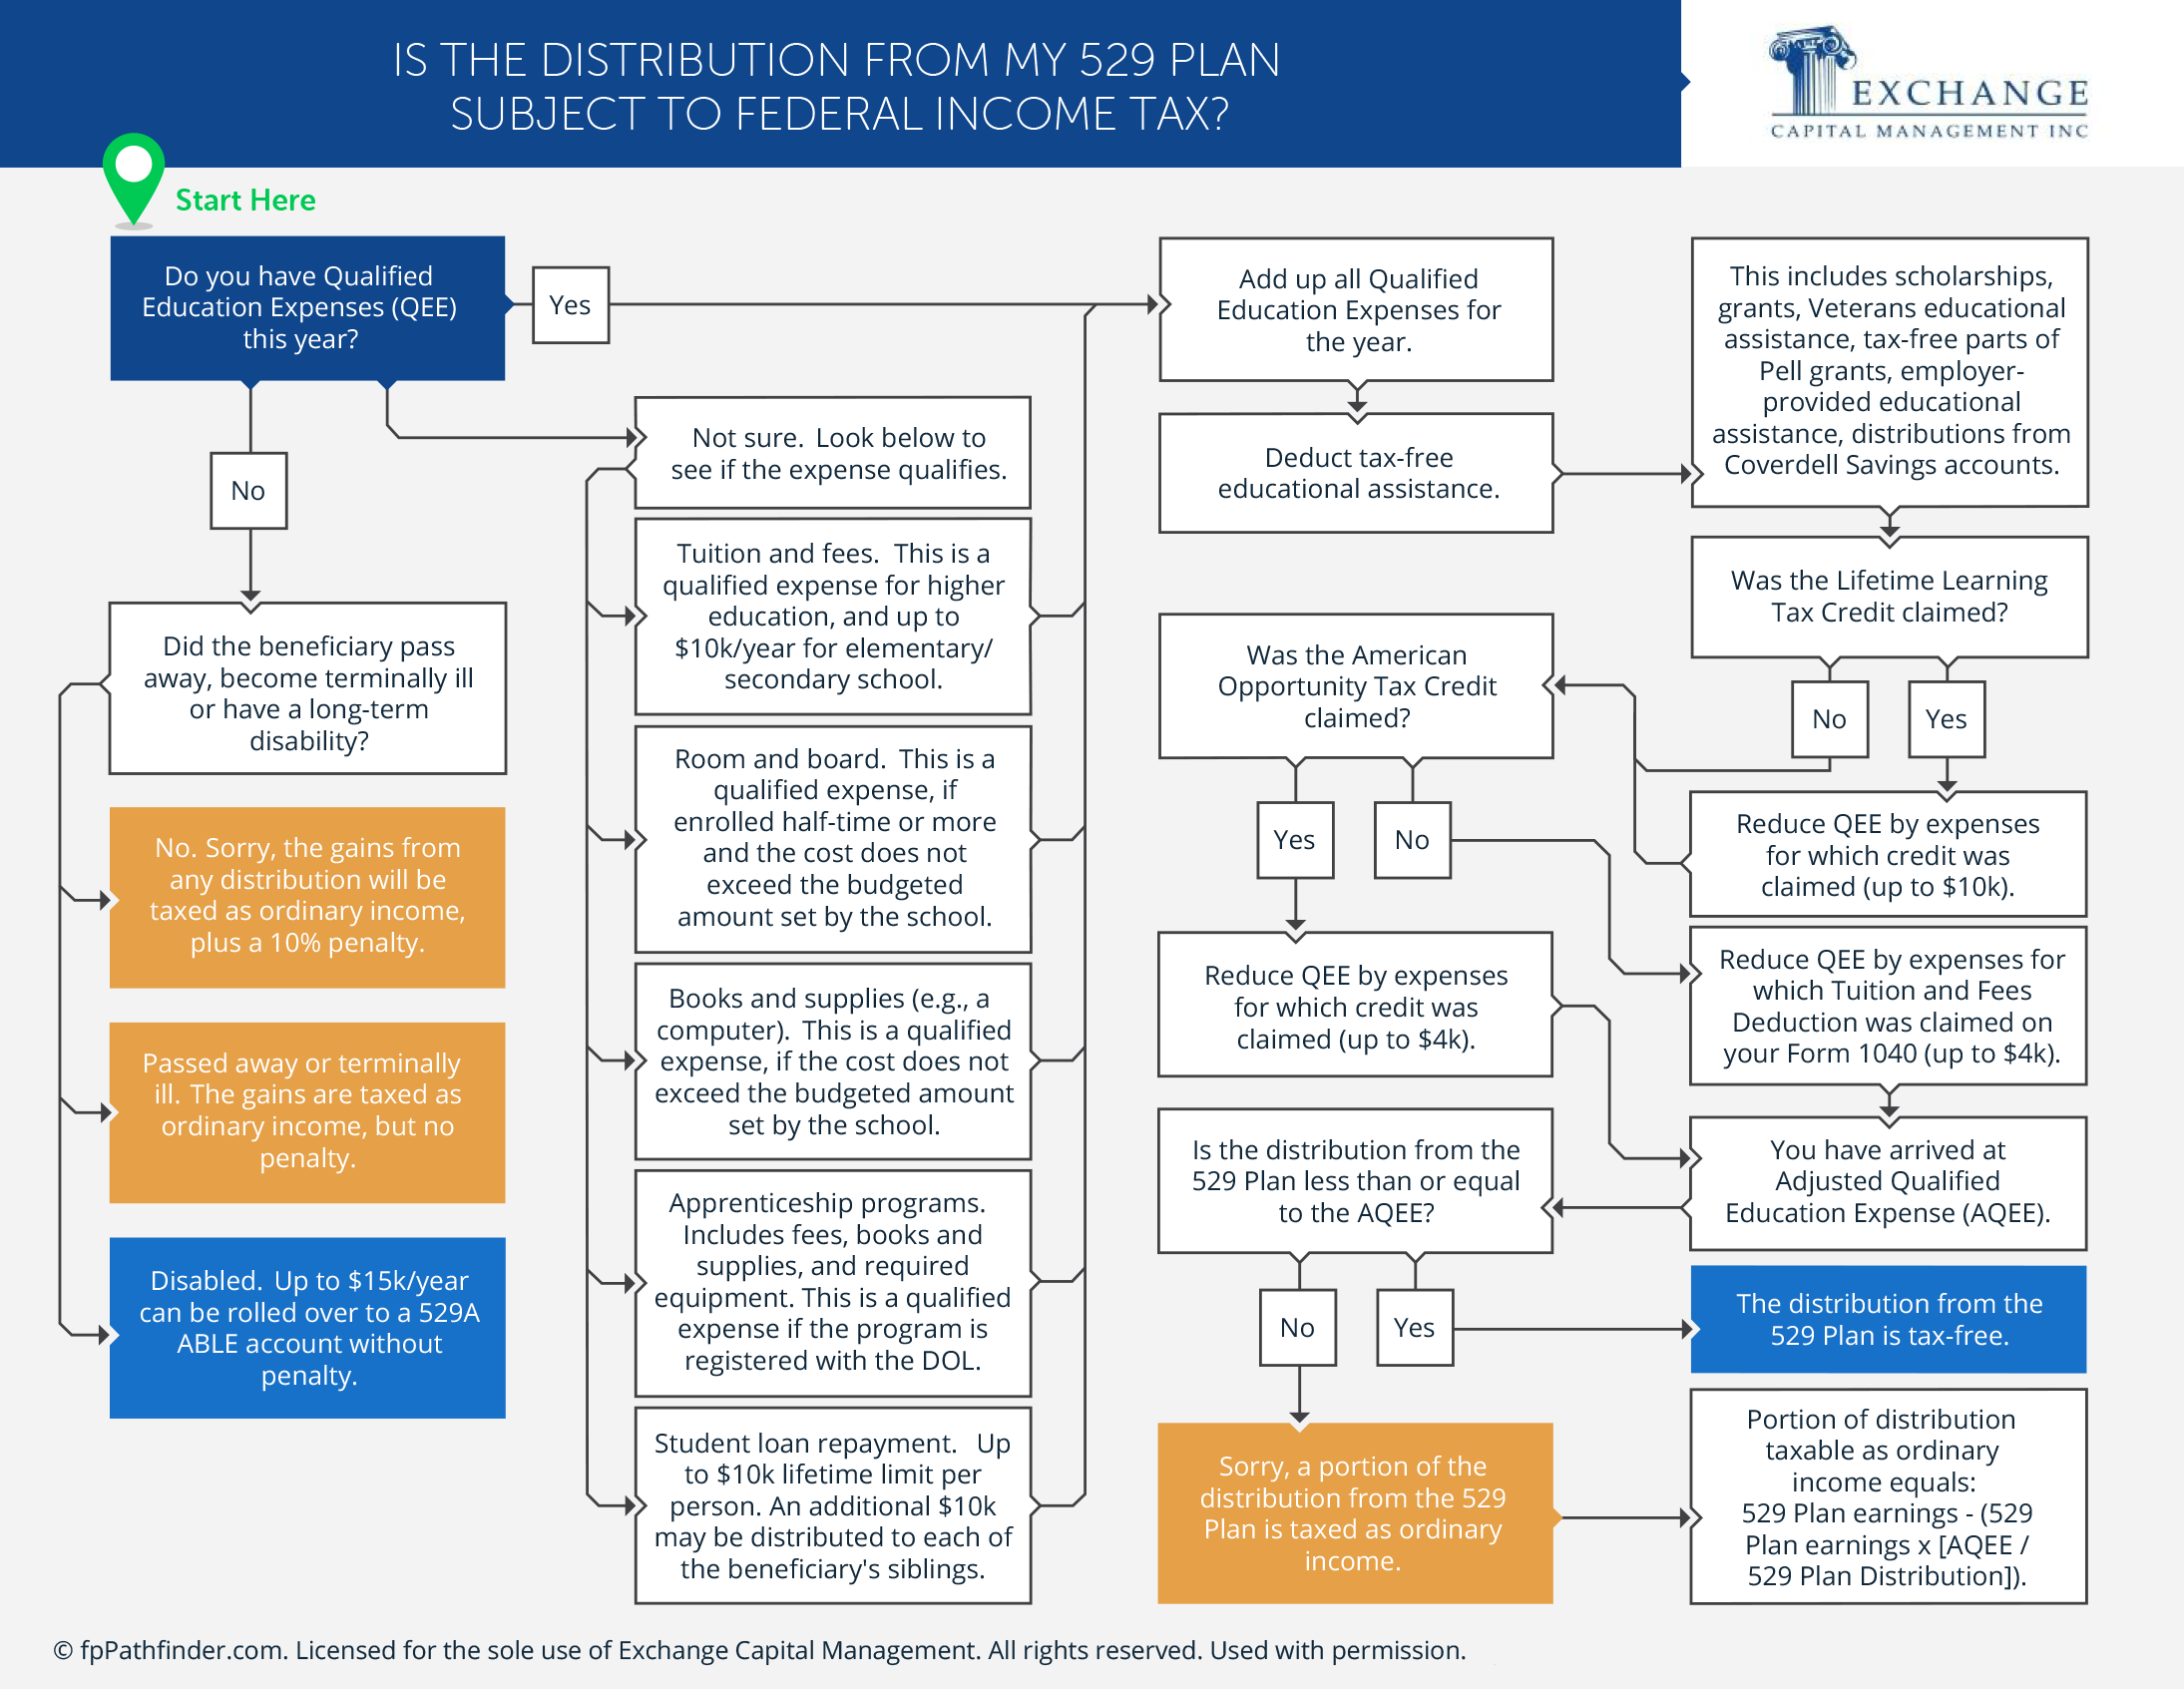 Is the Distribution From My 529 Plan Subject to Federal Income Tax?